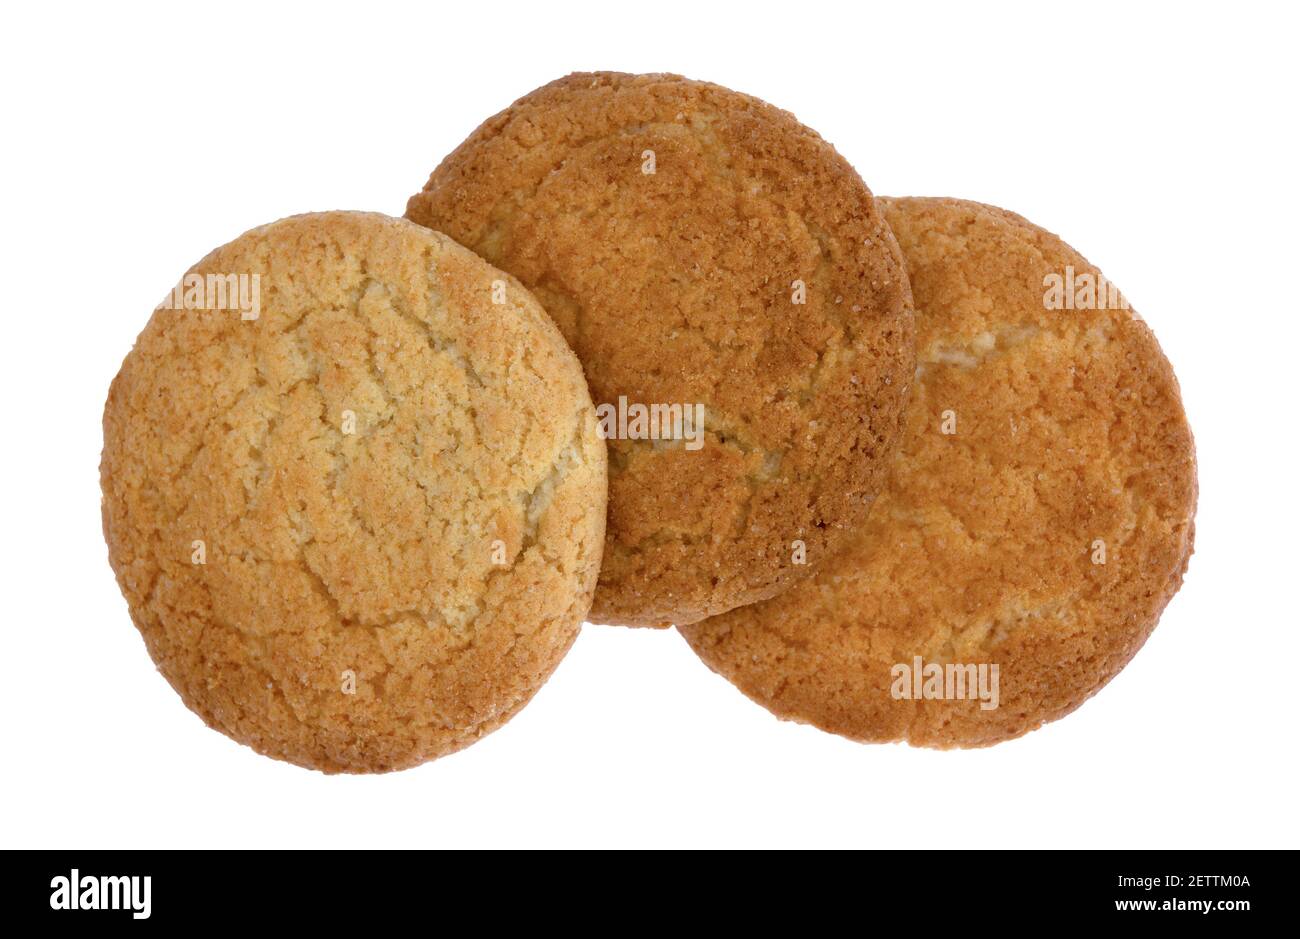 Top view of three coconut flavor cookies arranged and isolated on a white background. Stock Photo